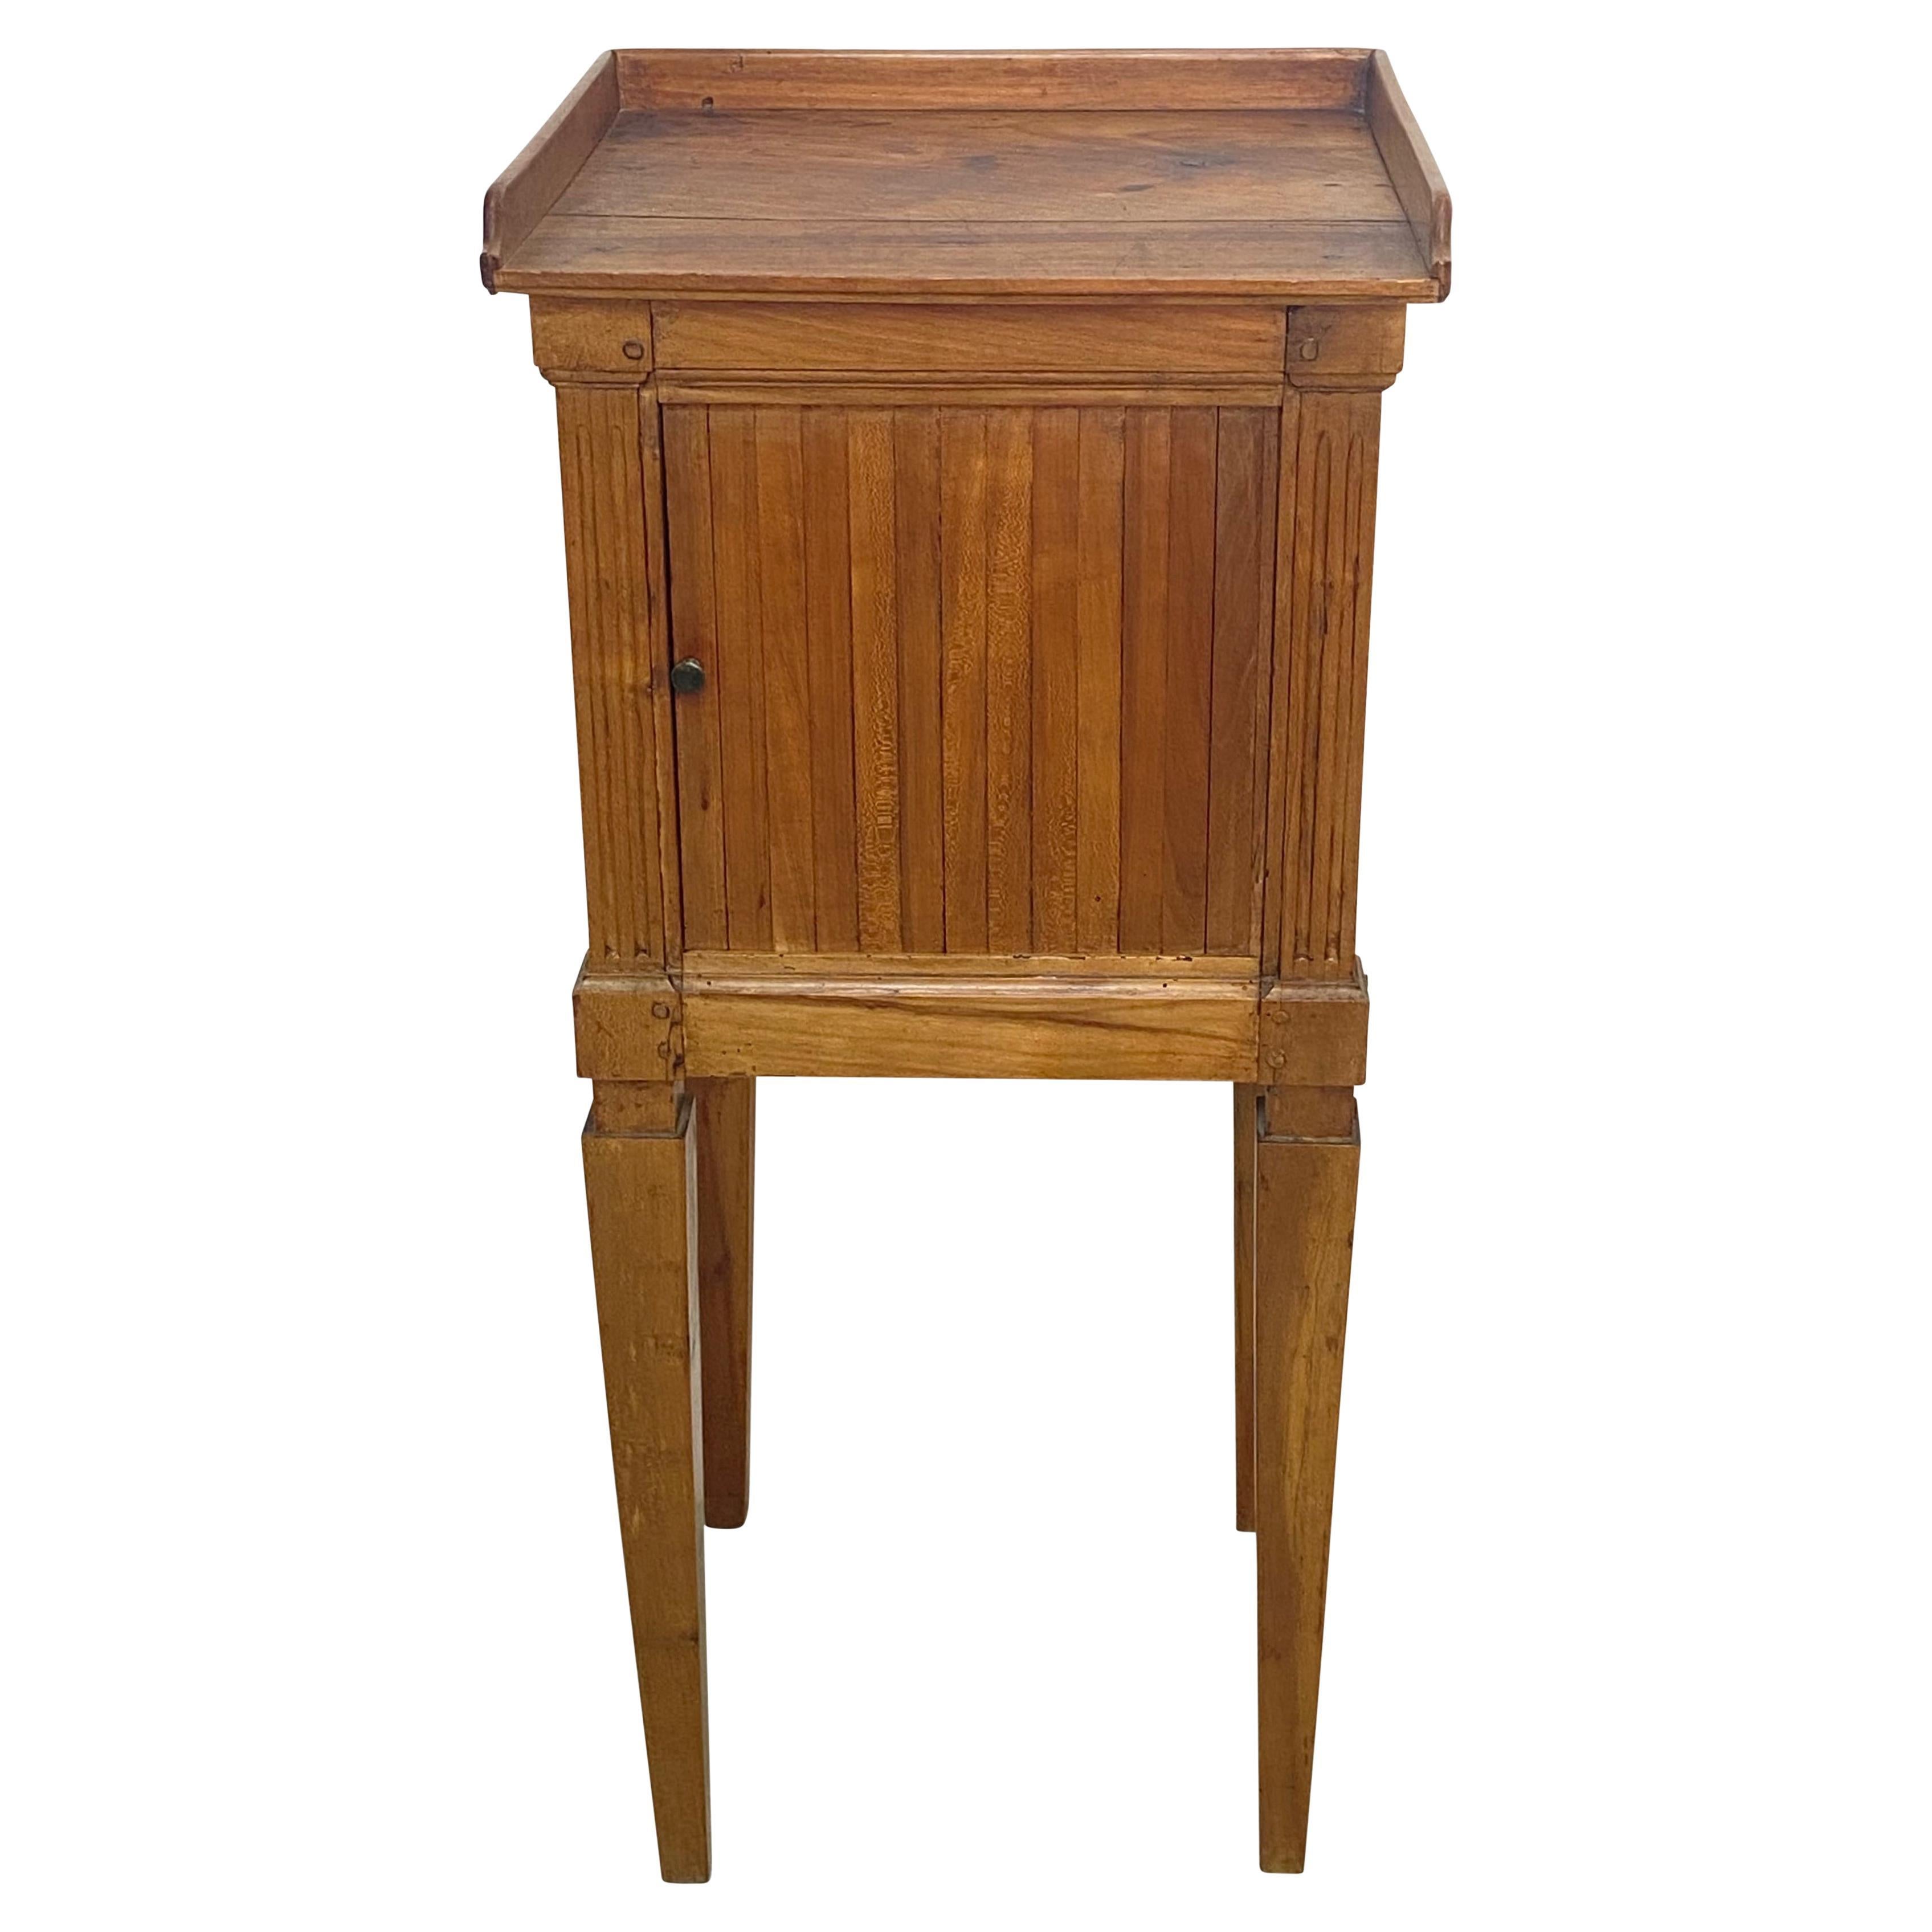 Neoclassical Style Cherrywood Bedside Table Cabinet, French Late 18th Century